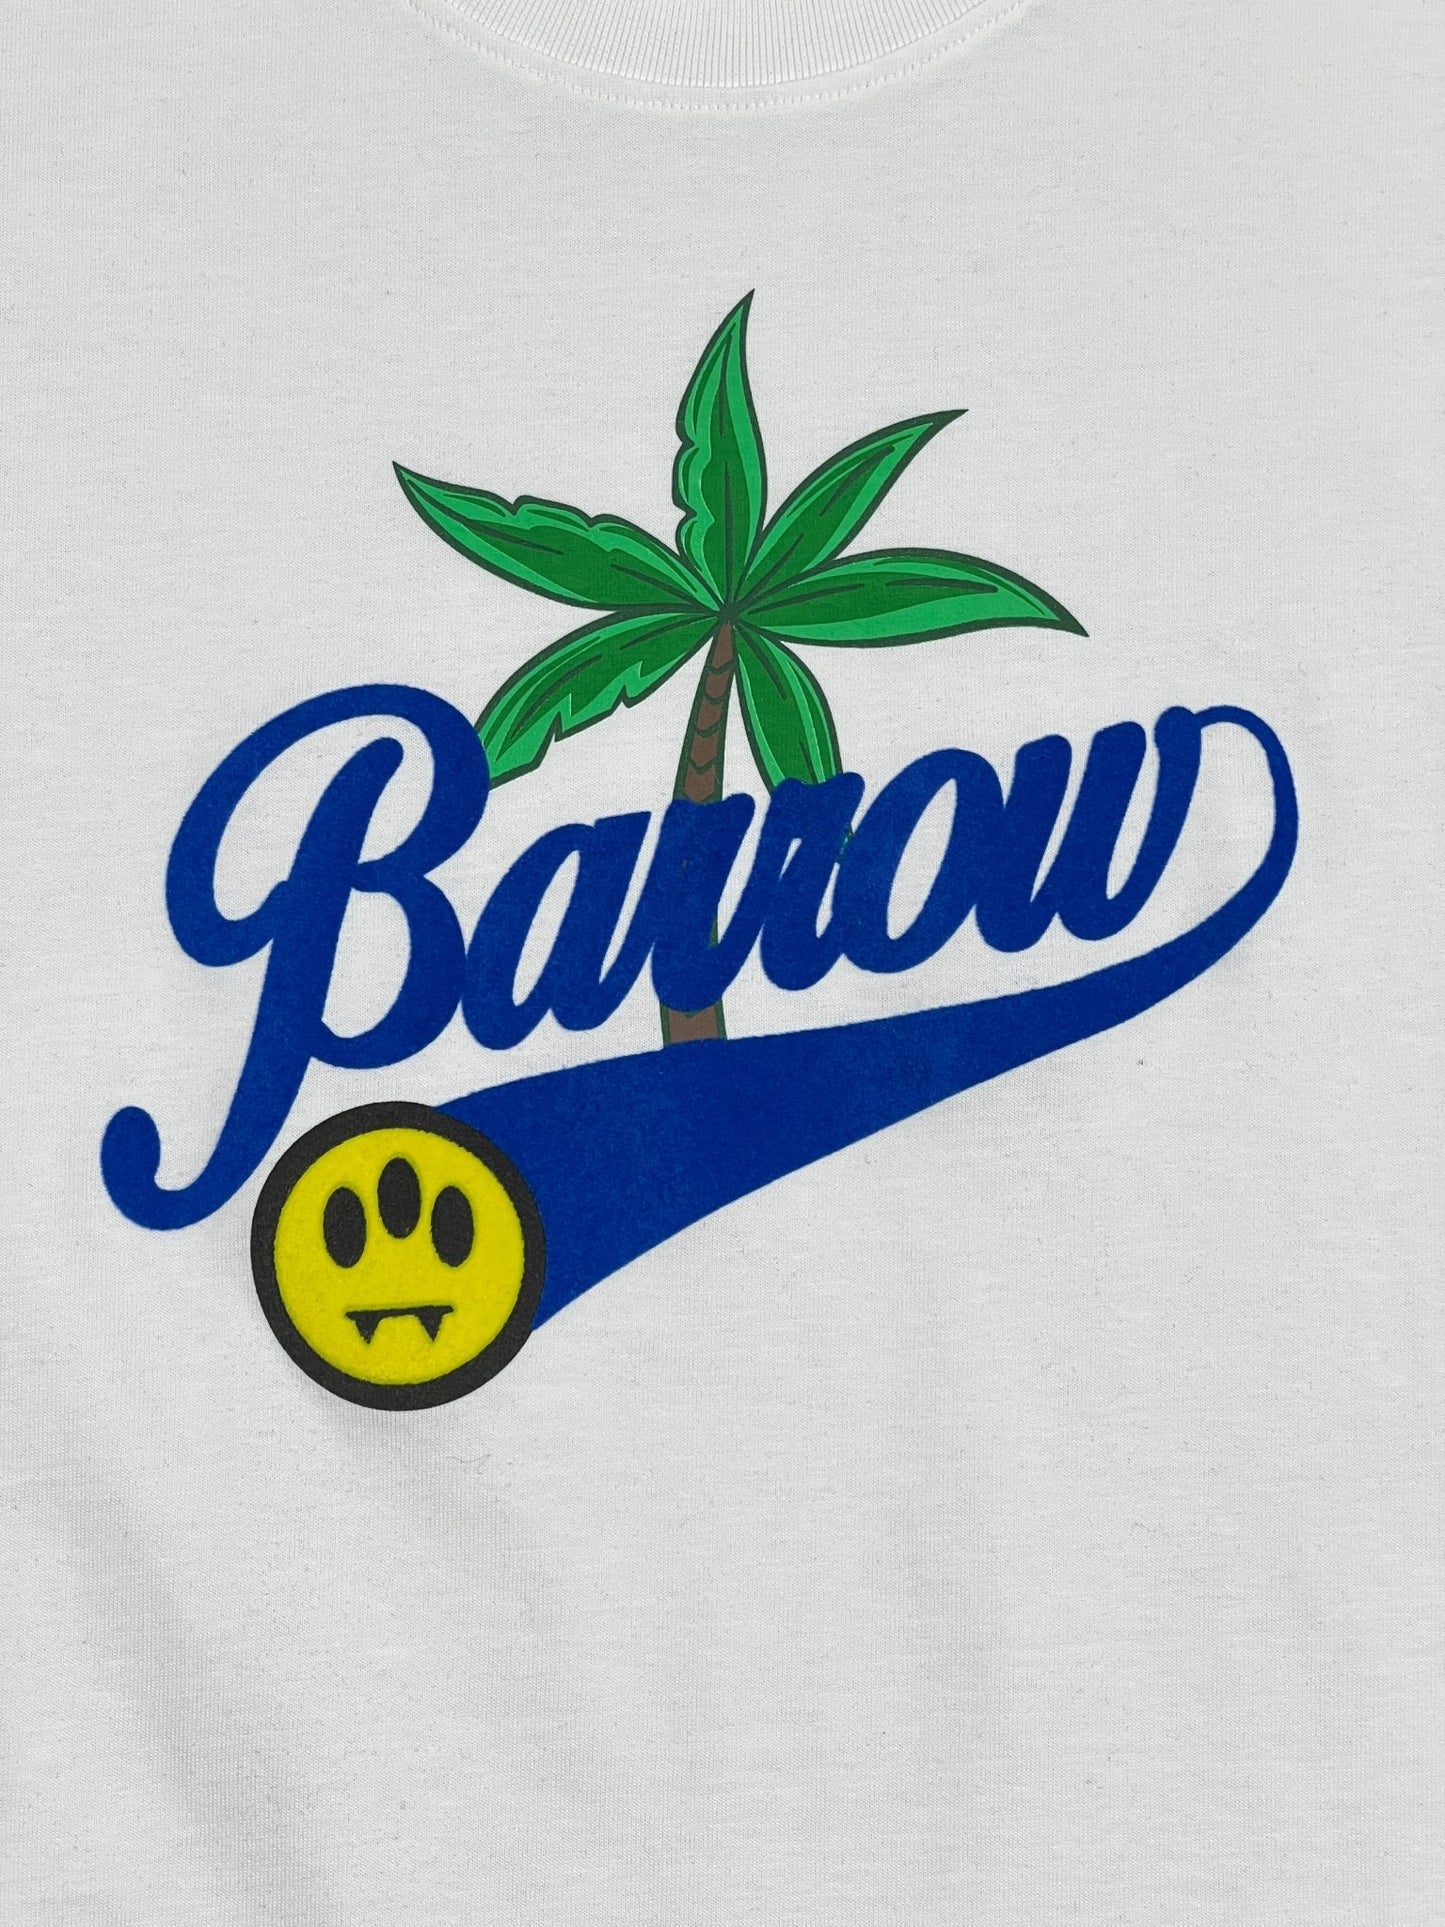 Logo with the word "BARROW" in blue script, featuring a palm tree and a yellow smiley face on a white background, made in Italy on the BARROW S4BWUATH036 JERSEY T-SHIRT UNISEX.